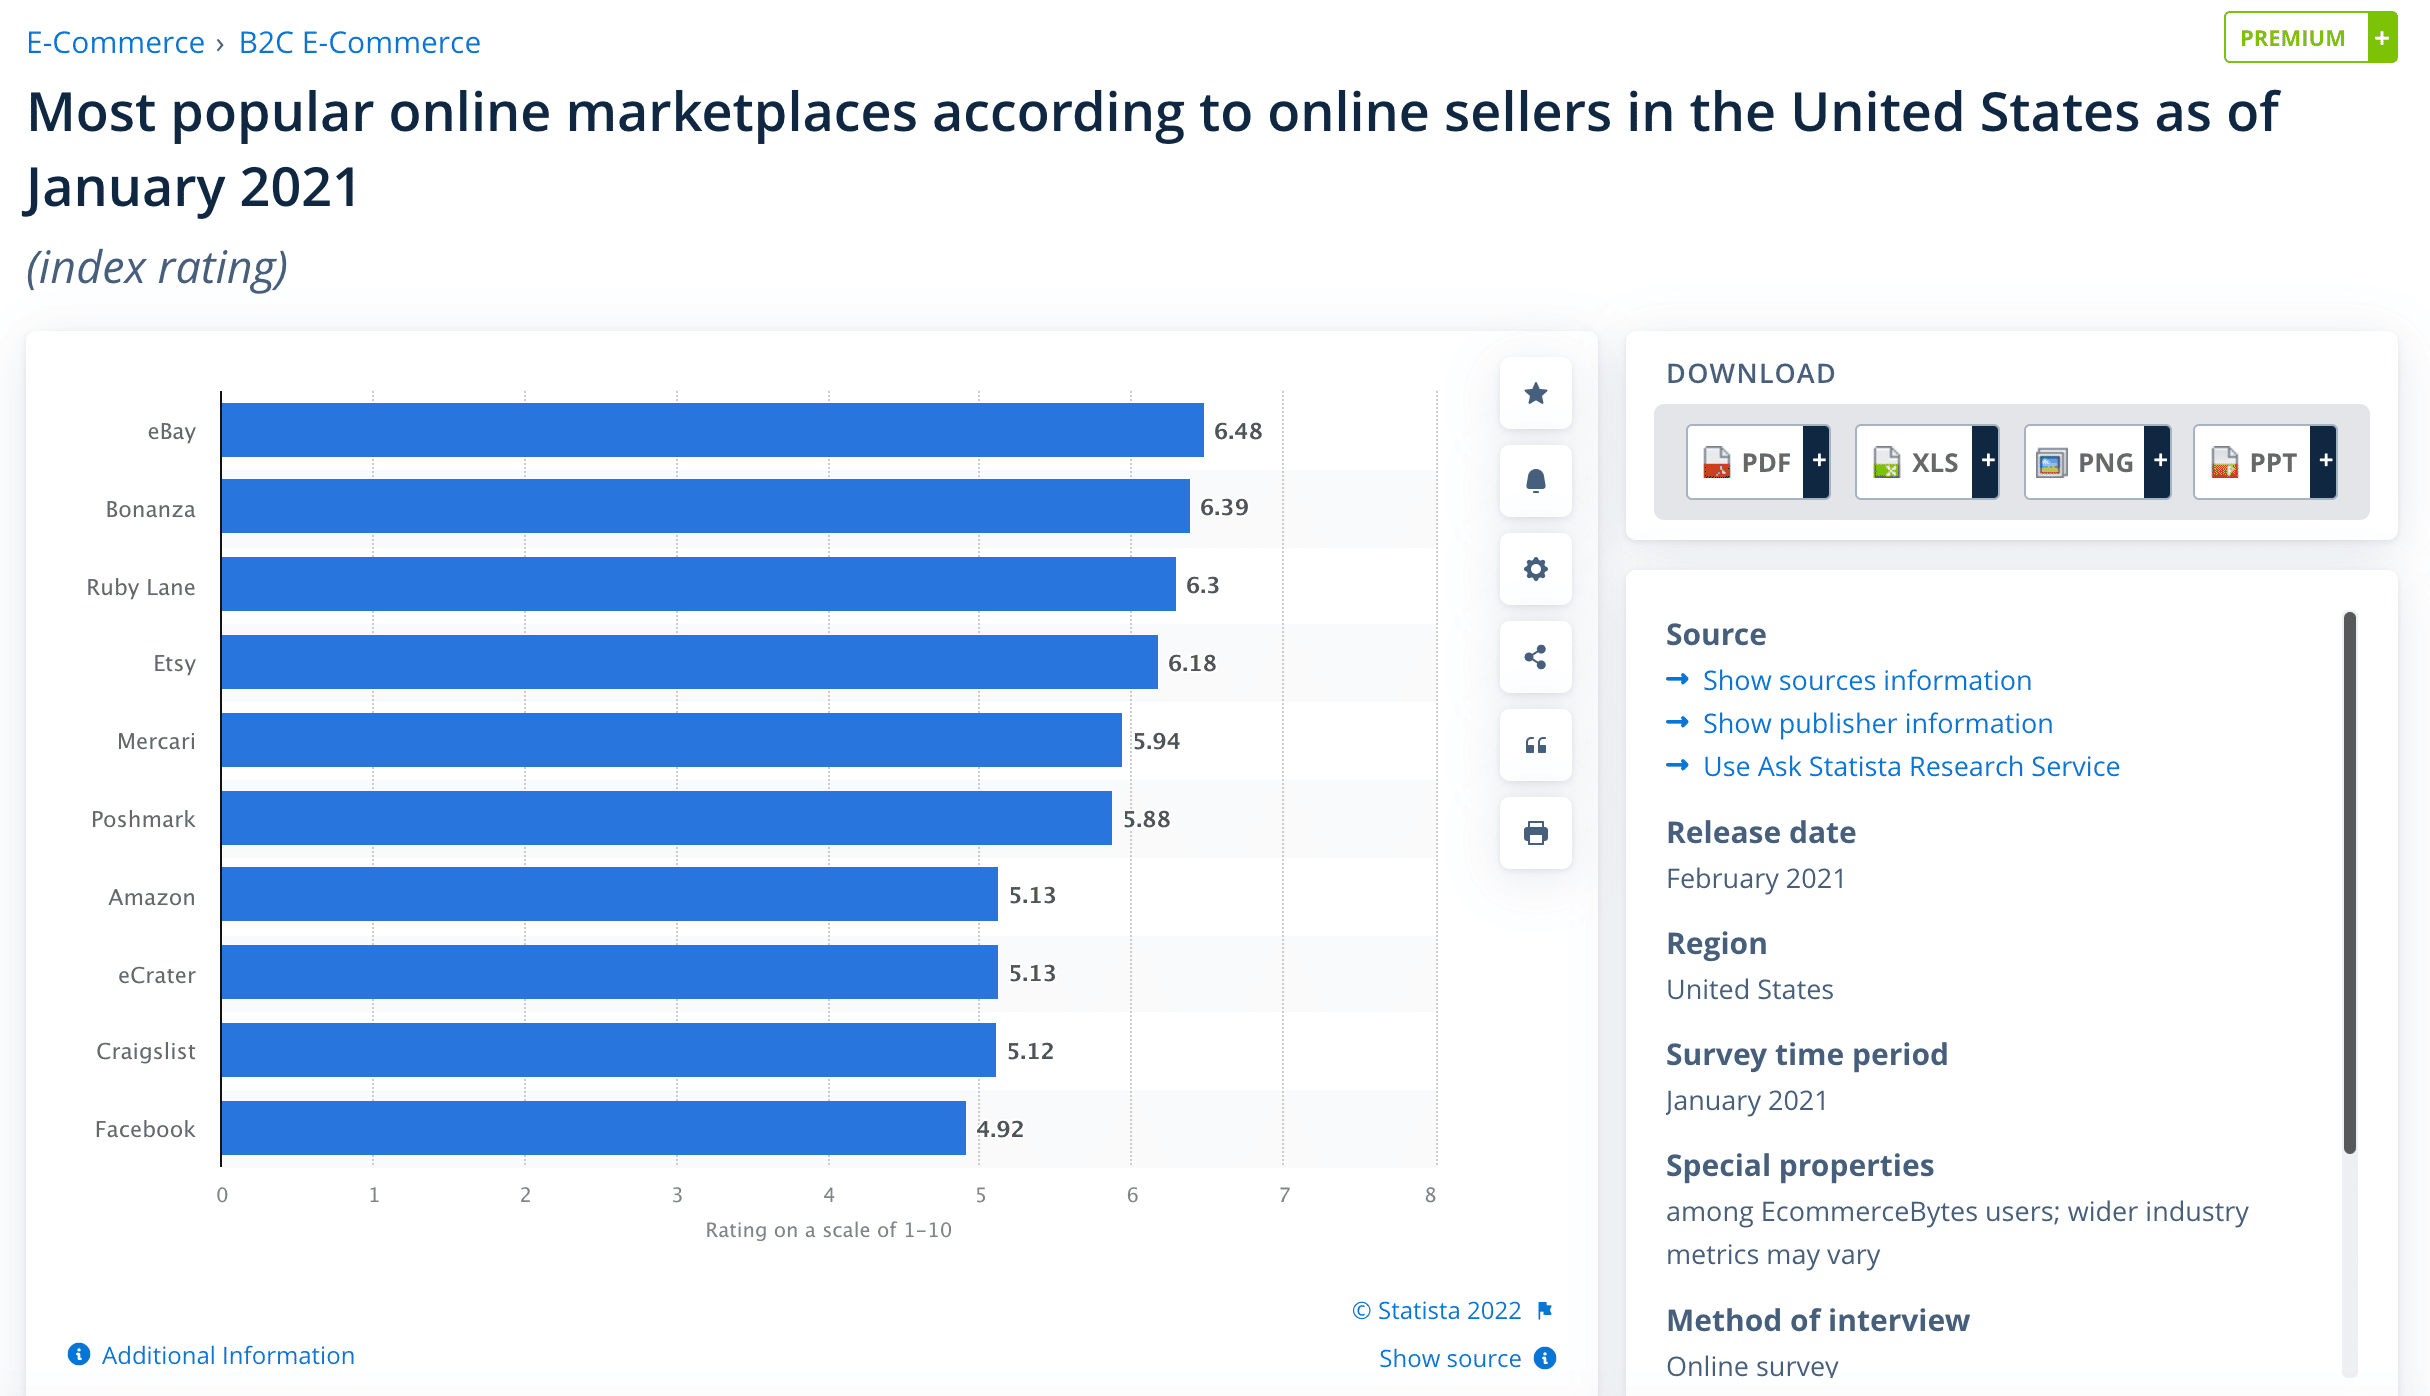 Most popular online marketplaces according to online sellers in the United States as of January 2021 -  